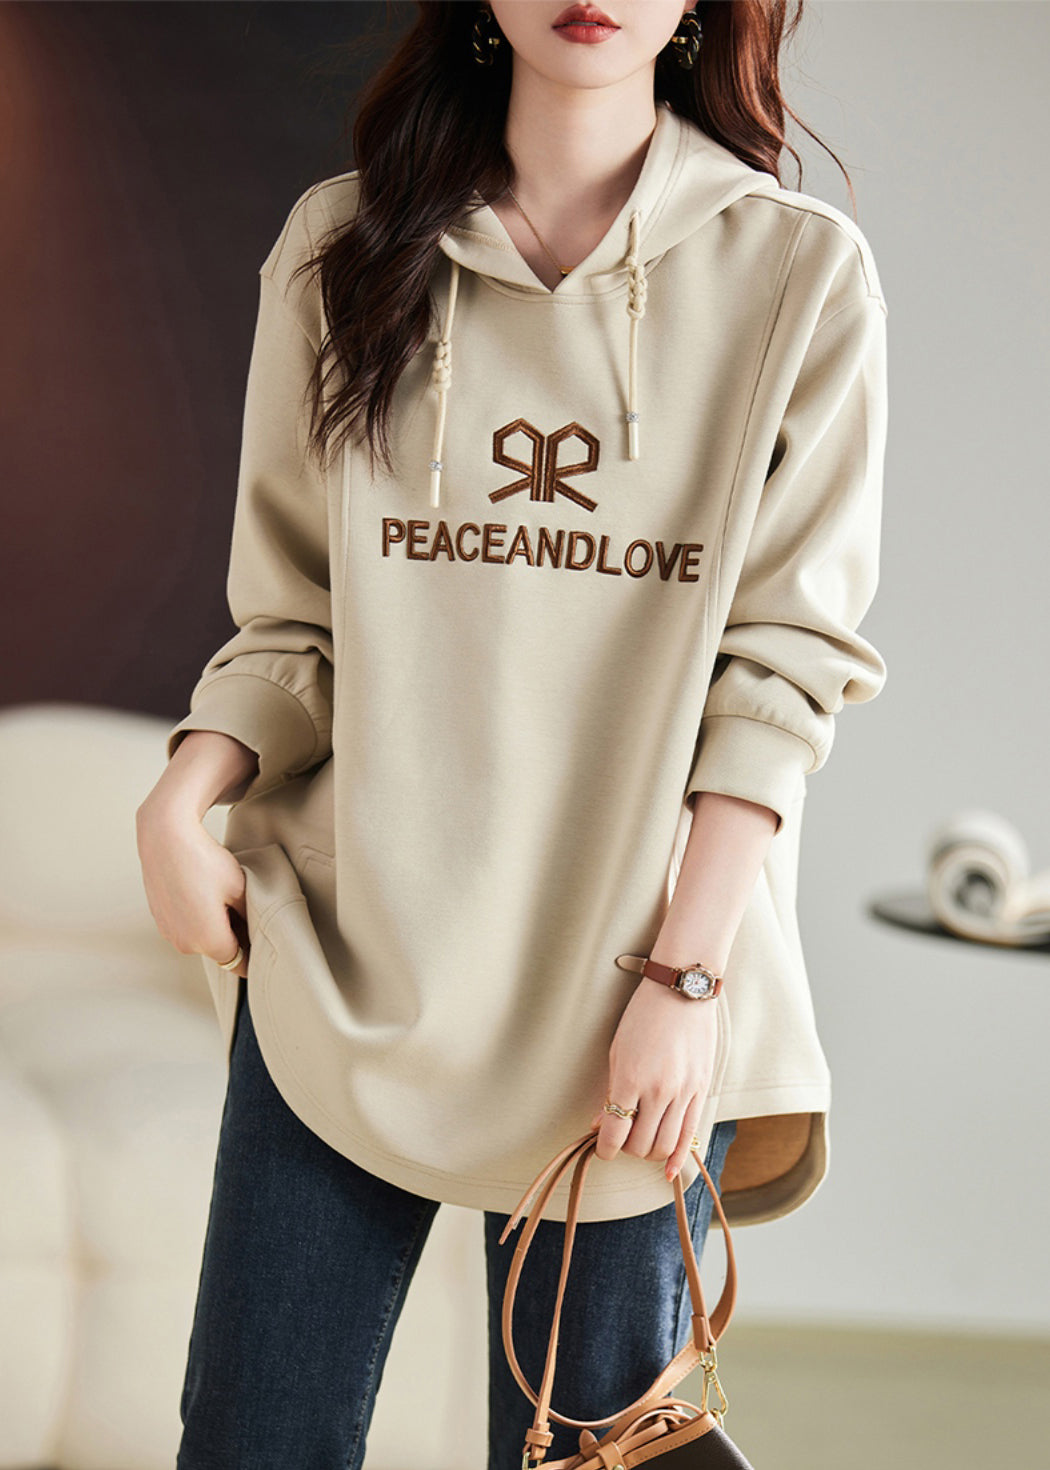 Fashion Apricot Embroideried Cotton Sweatshirts Top Spring